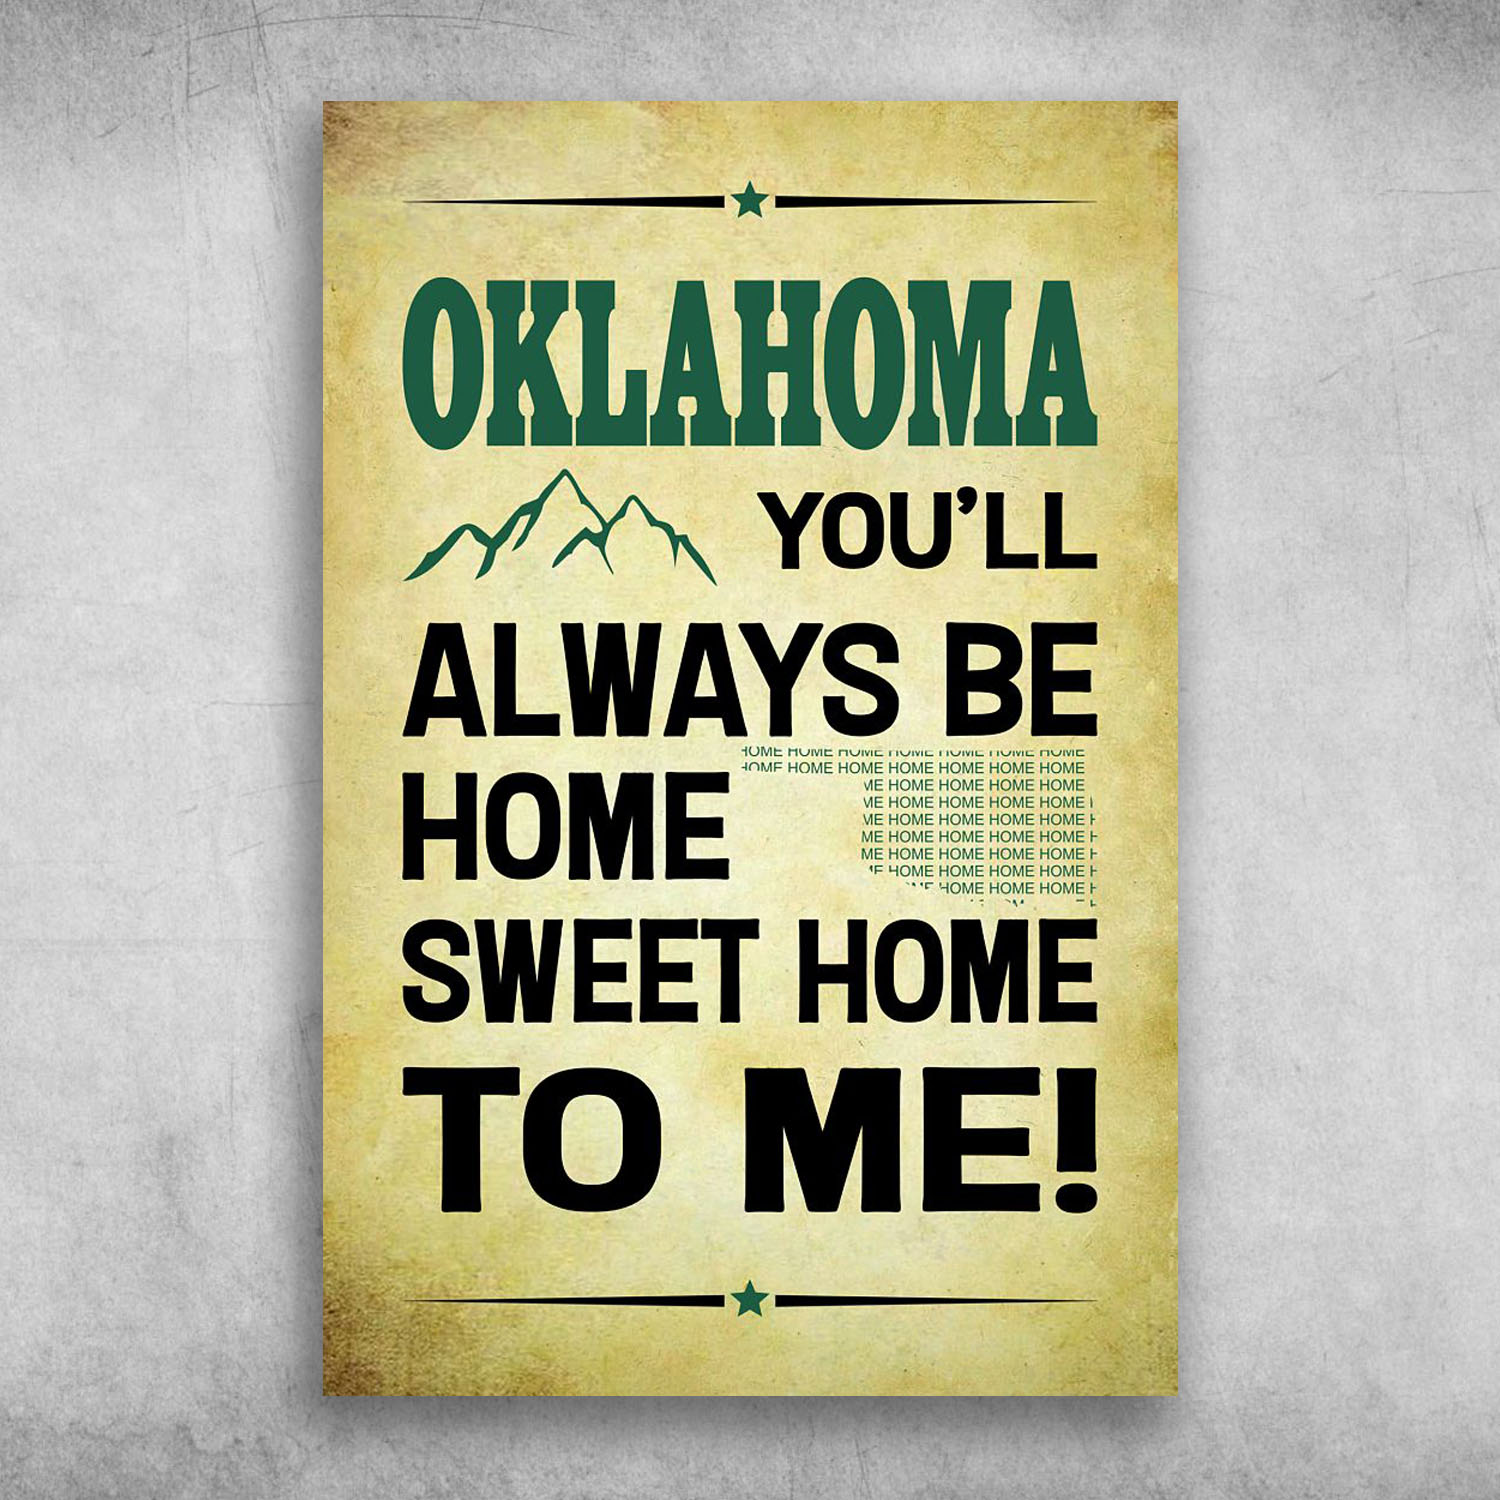 Oklahoma You'll Always Be Home Sweet Home